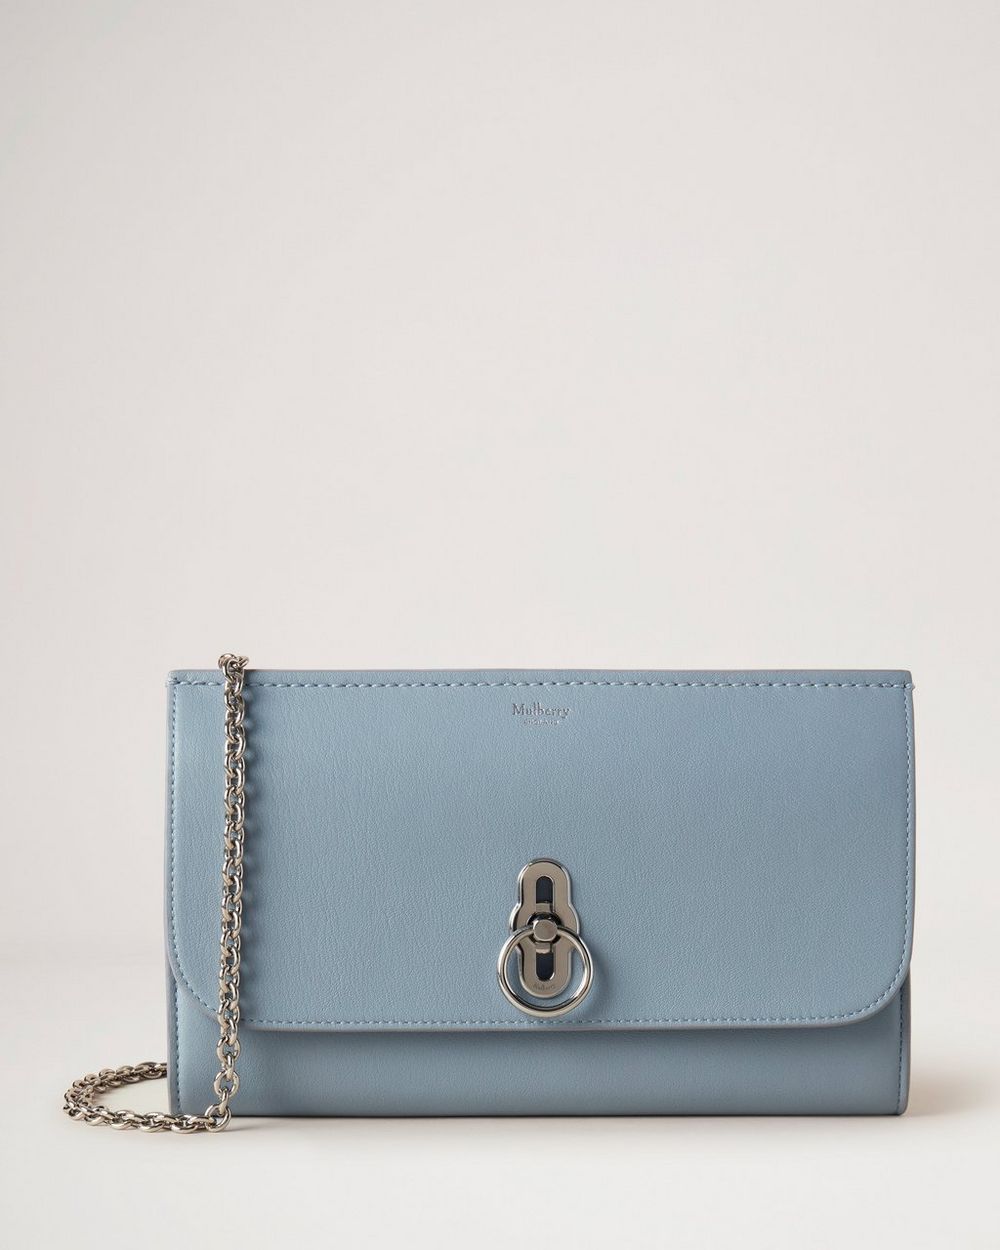 Blue Mulberry Amberley Clutch in Cloud Silky Calf leather